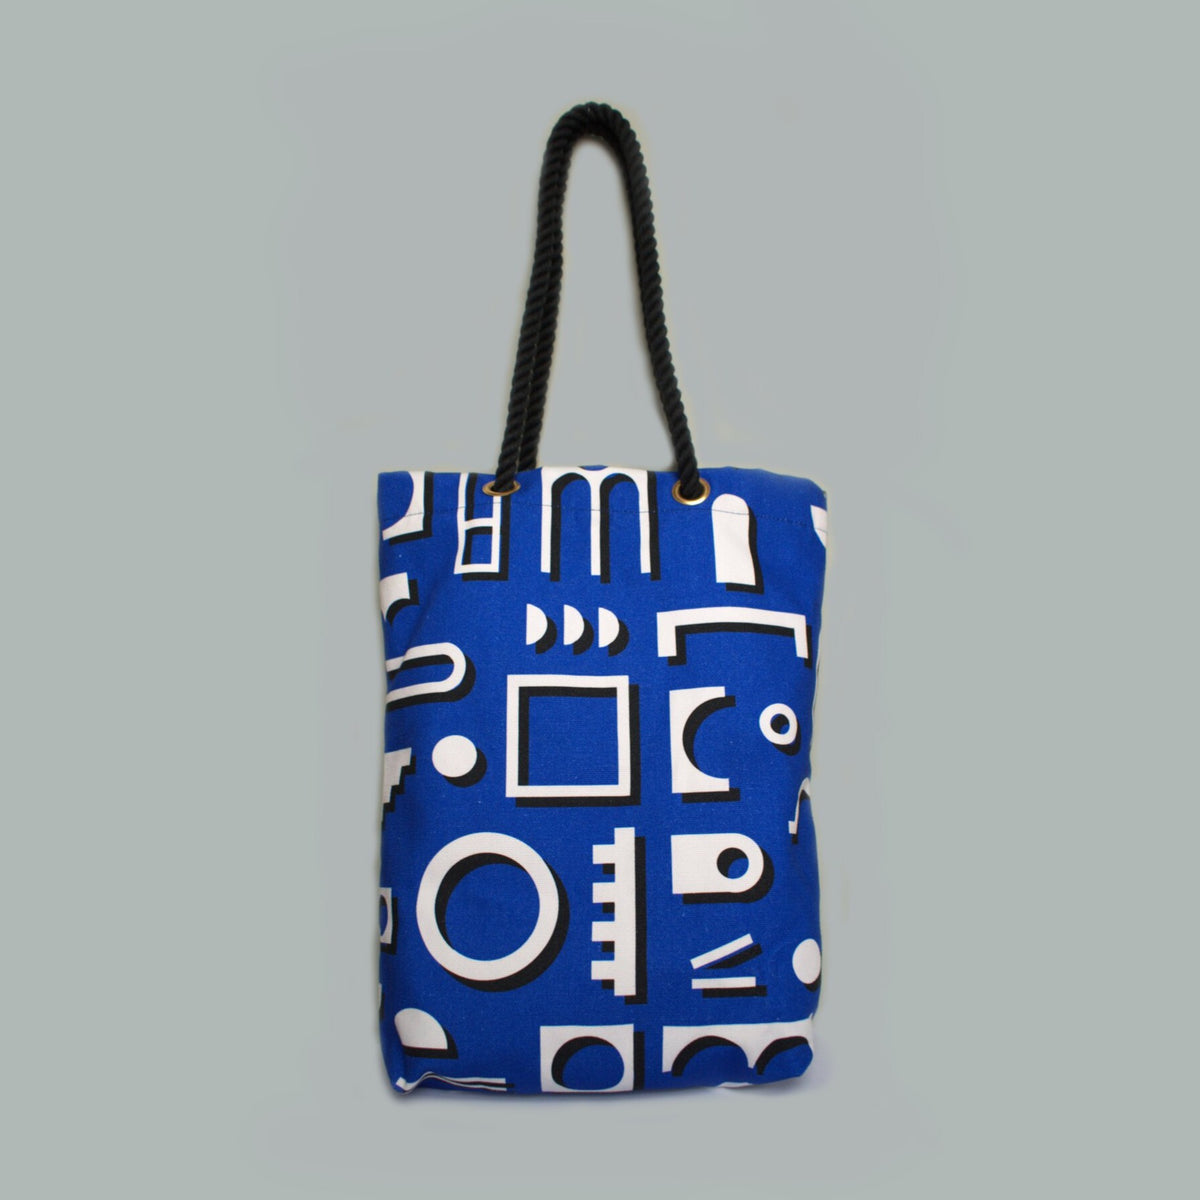 Sunbeam Tote Shopping Bag Suppliers, China Sunbeam Tote Shopping Bag Manufacturers, Factory